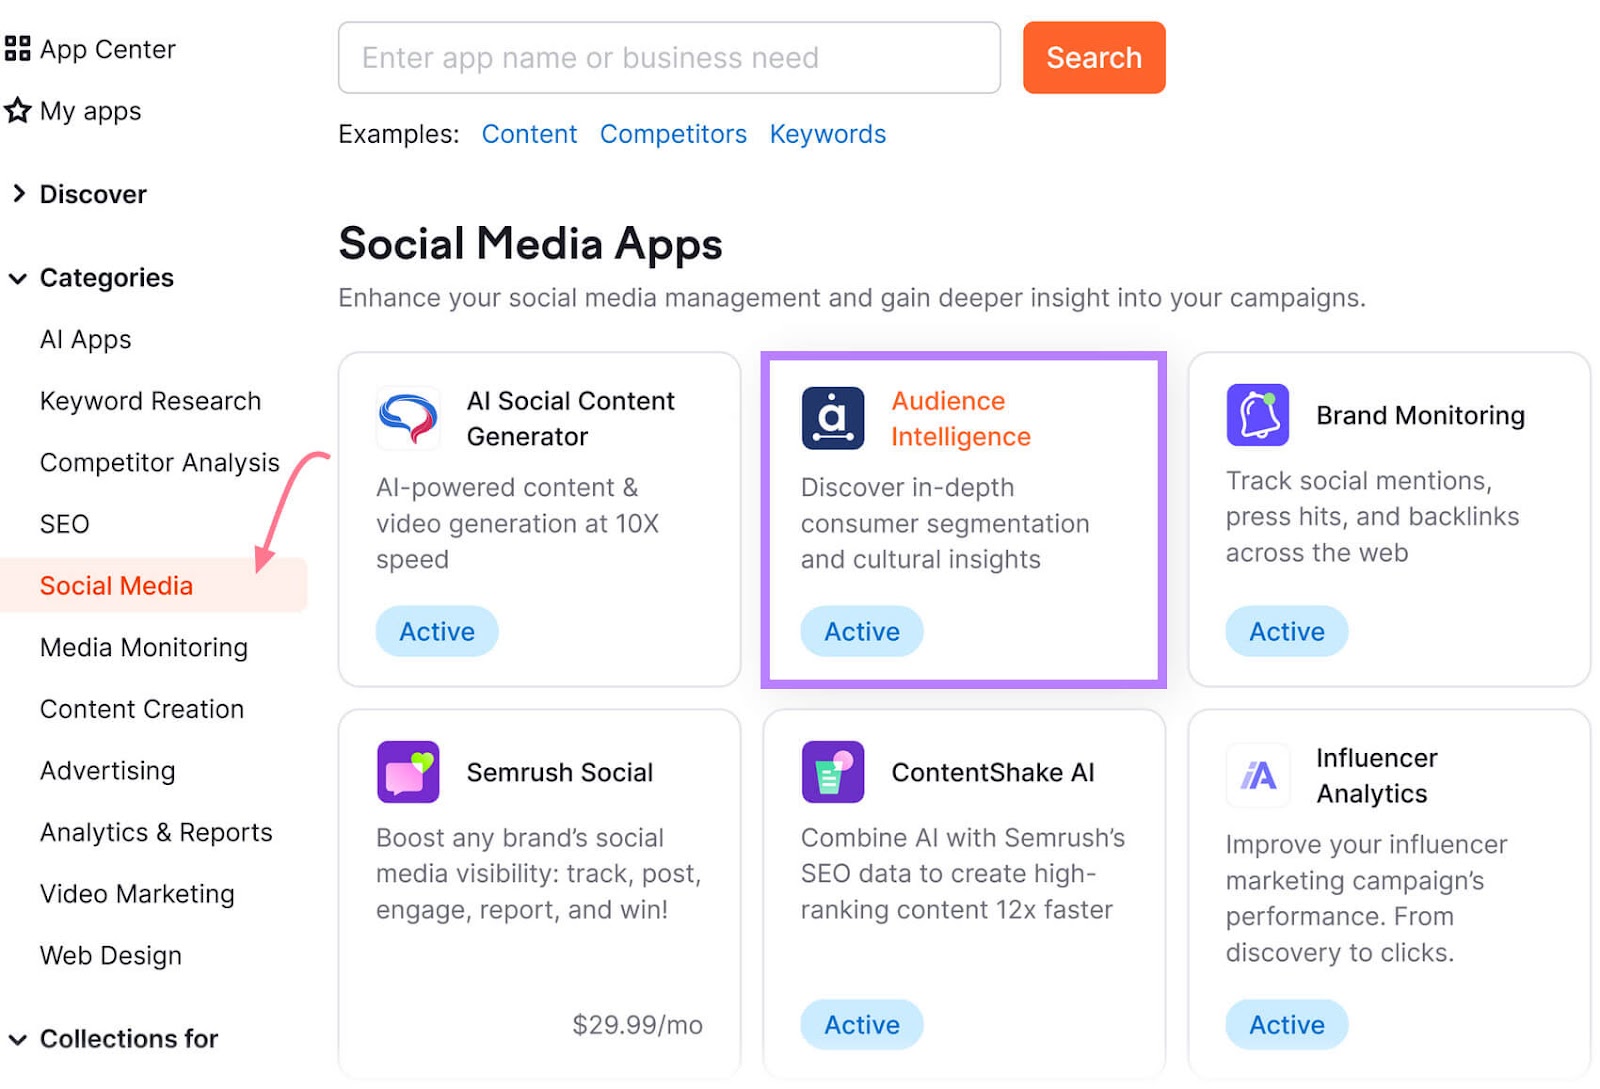 Social Media Apps section in the App Center with "Audience Intelligence" highlighted in a purple box.